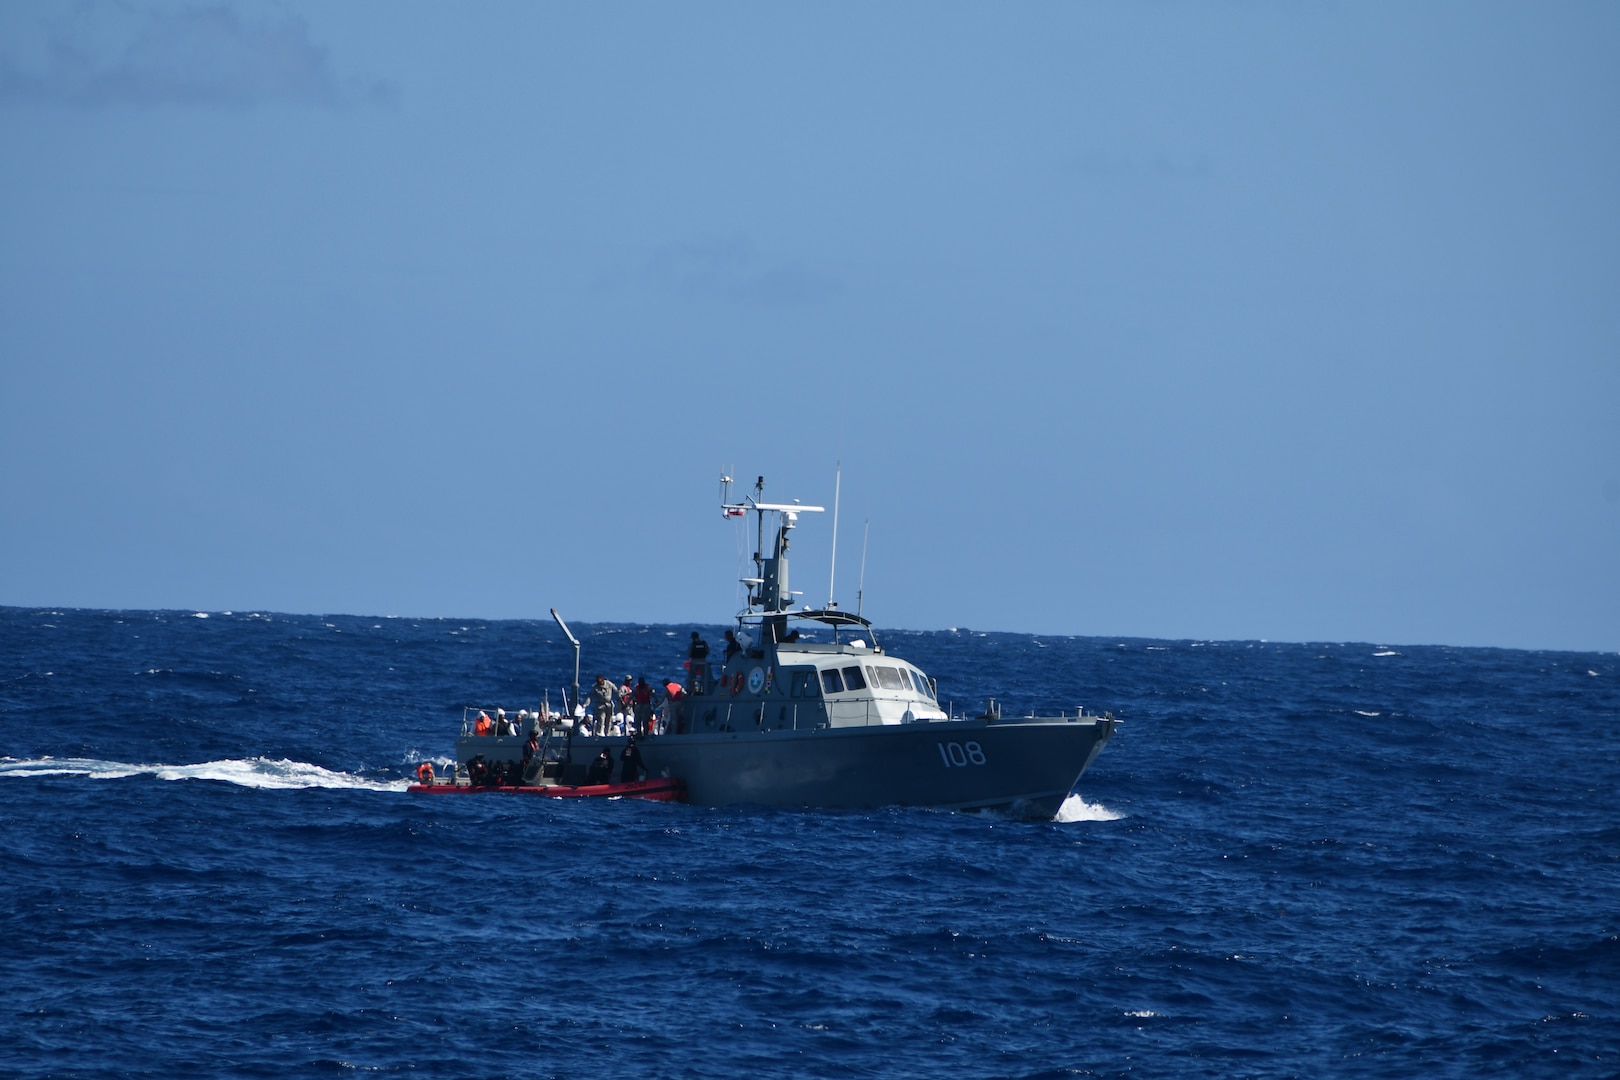 Coast Guard Cutter Joseph Napier’s small boat rendezvous with a Dominican Republic Navy vessel during the repatriation of 53 migrants to Dominican Republic, Jan. 12, 2023.  The migrant group was interdicted in the Mona Passage by Puerto Rico Police marine units, the Coast Guard Cutter Joseph Napier and a U.S. Customs and Border Protection multi-role enforcement aircraft the night of Jan. 10, 2024 near Cabo Rojo, Puerto Rico. (U.S. Coast Guard photo)